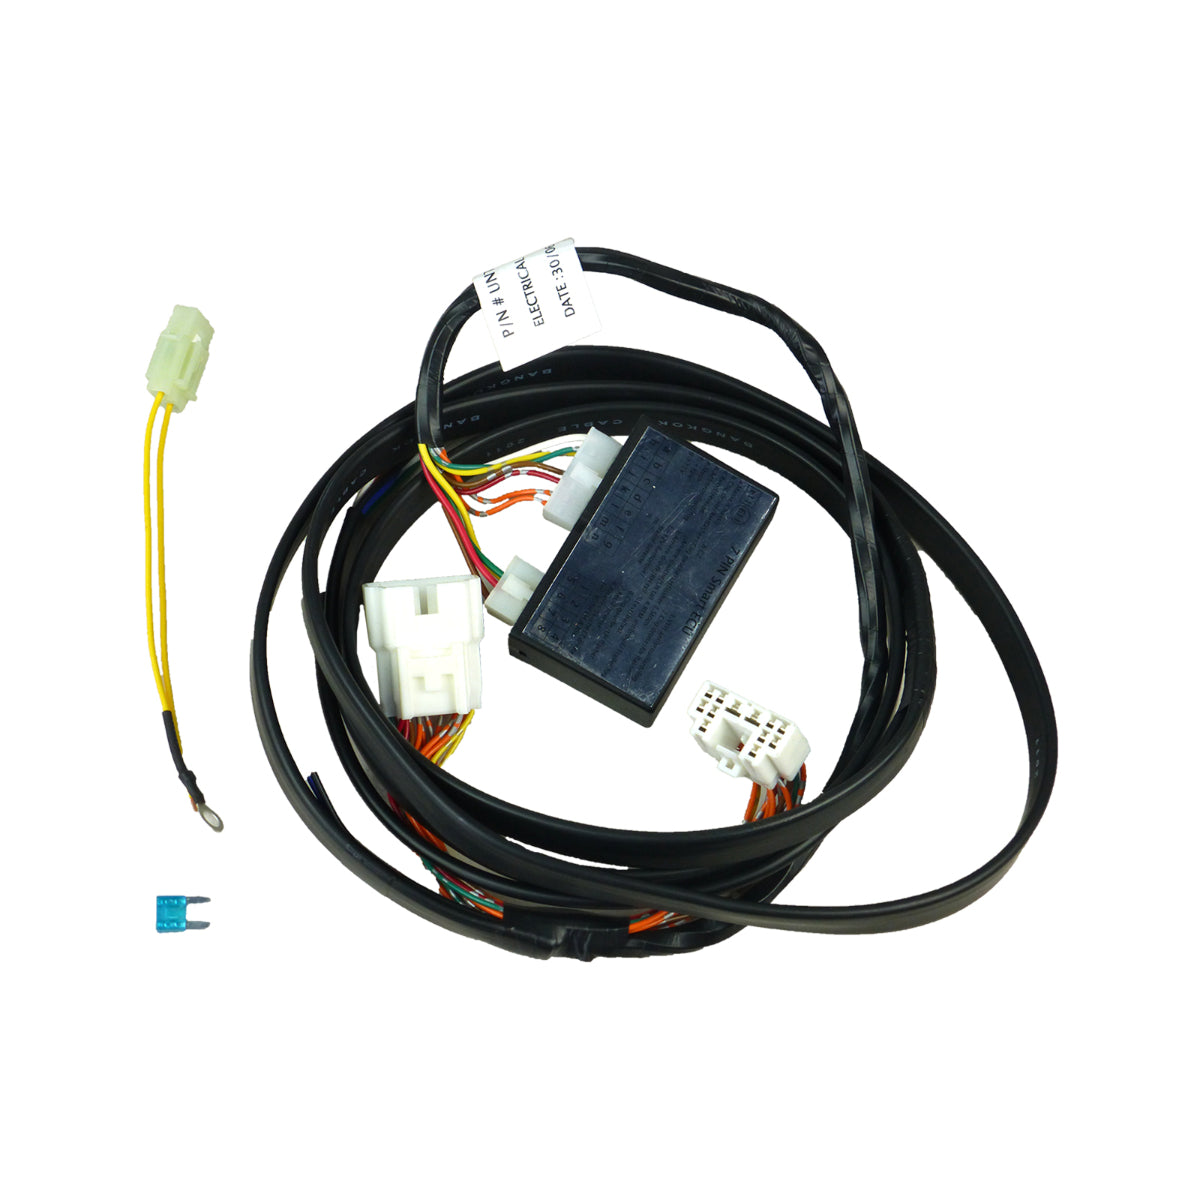 TAG Direct Fit Wiring Harness for Holden Commodore (01/2006 - 05/2013), Statesman (01/2006 - 01/2009), Caprice (01/2006 - 01/2009), HSV Clubsport (08/2006 - 05/2013) - OZI4X4 PTY LTD